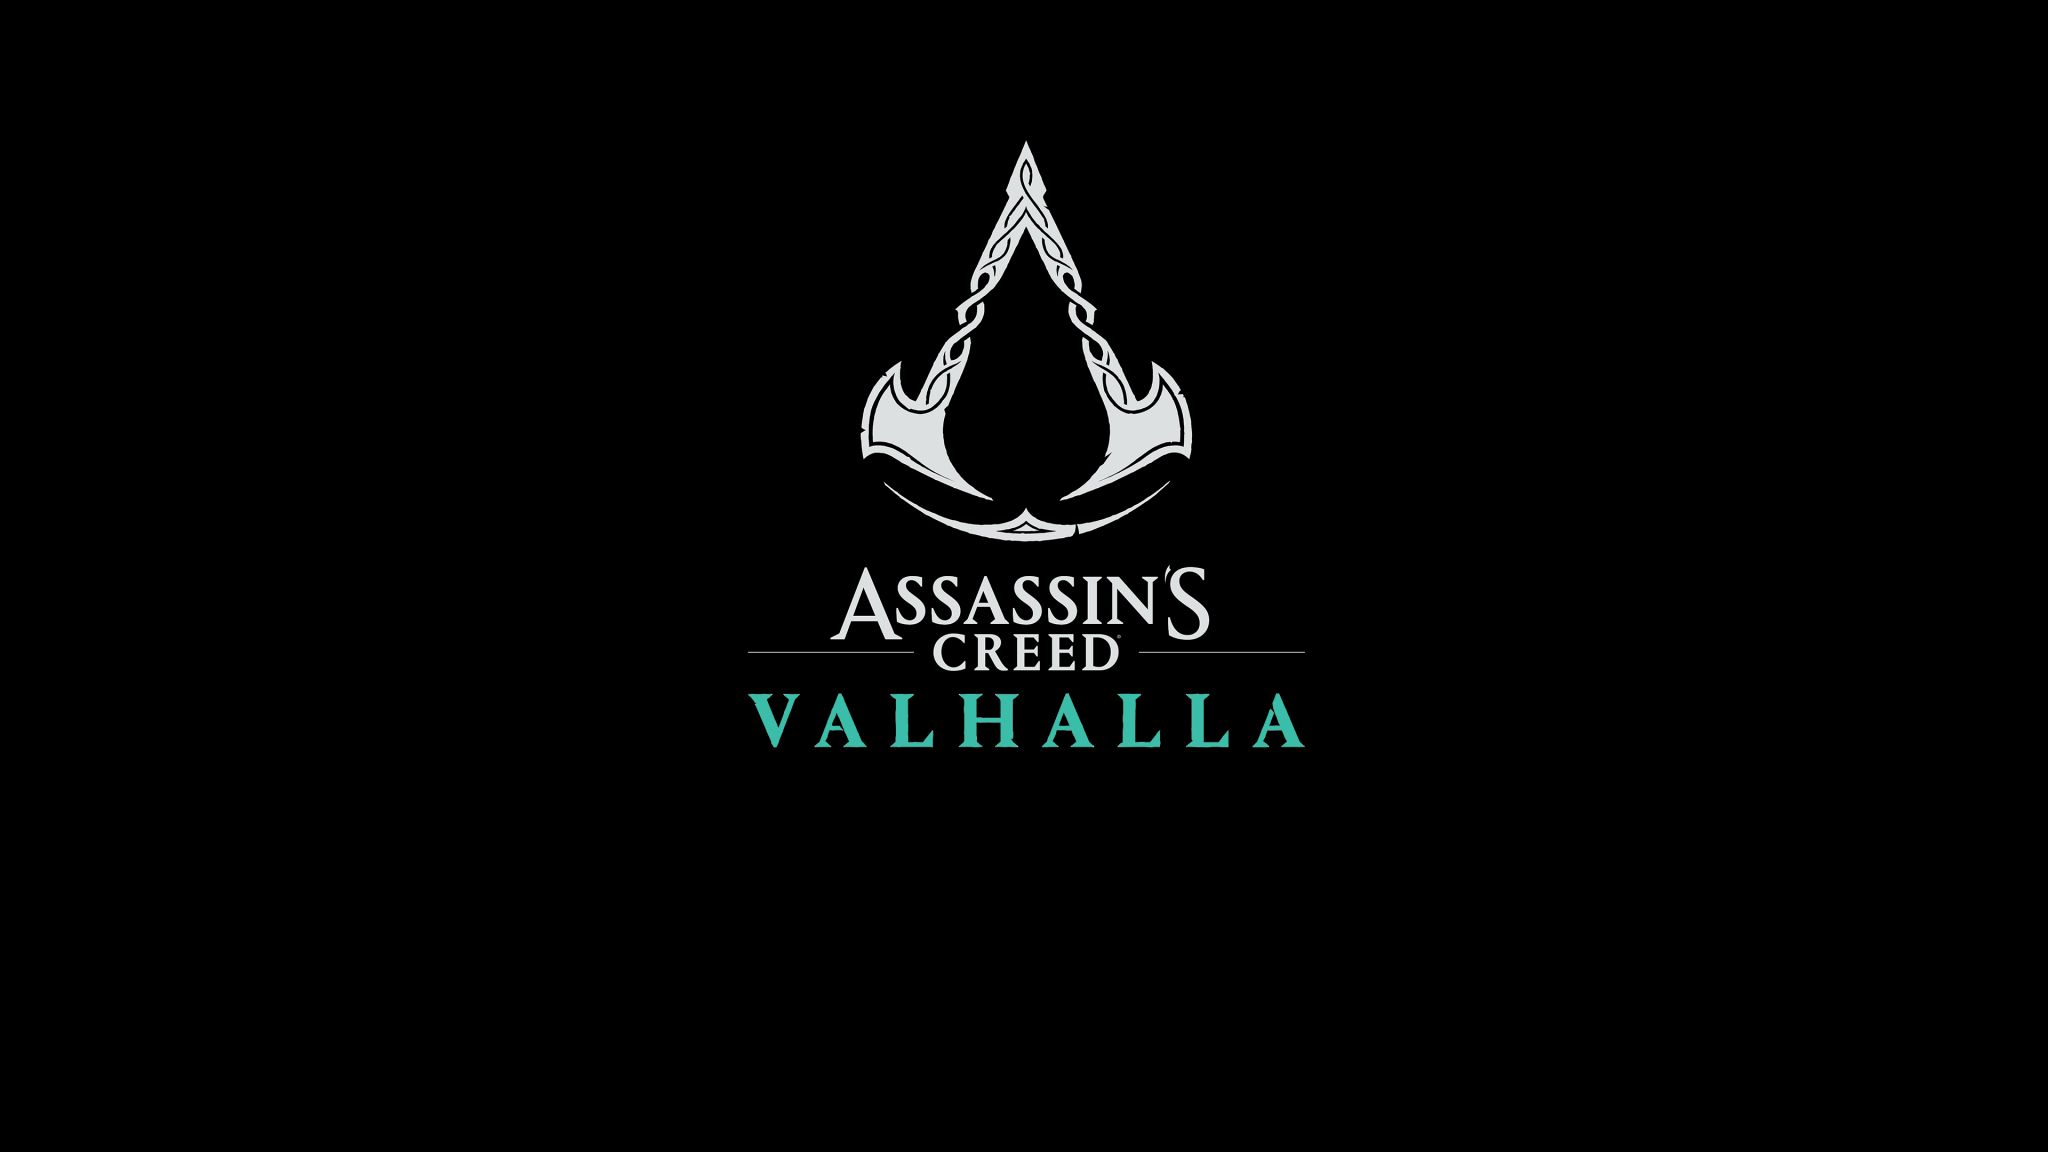 Assassin's Creed Valhalla 4K Game 2048x1152 Resolution Wallpaper, HD Games 4K Wallpaper, Image, Photo and Background